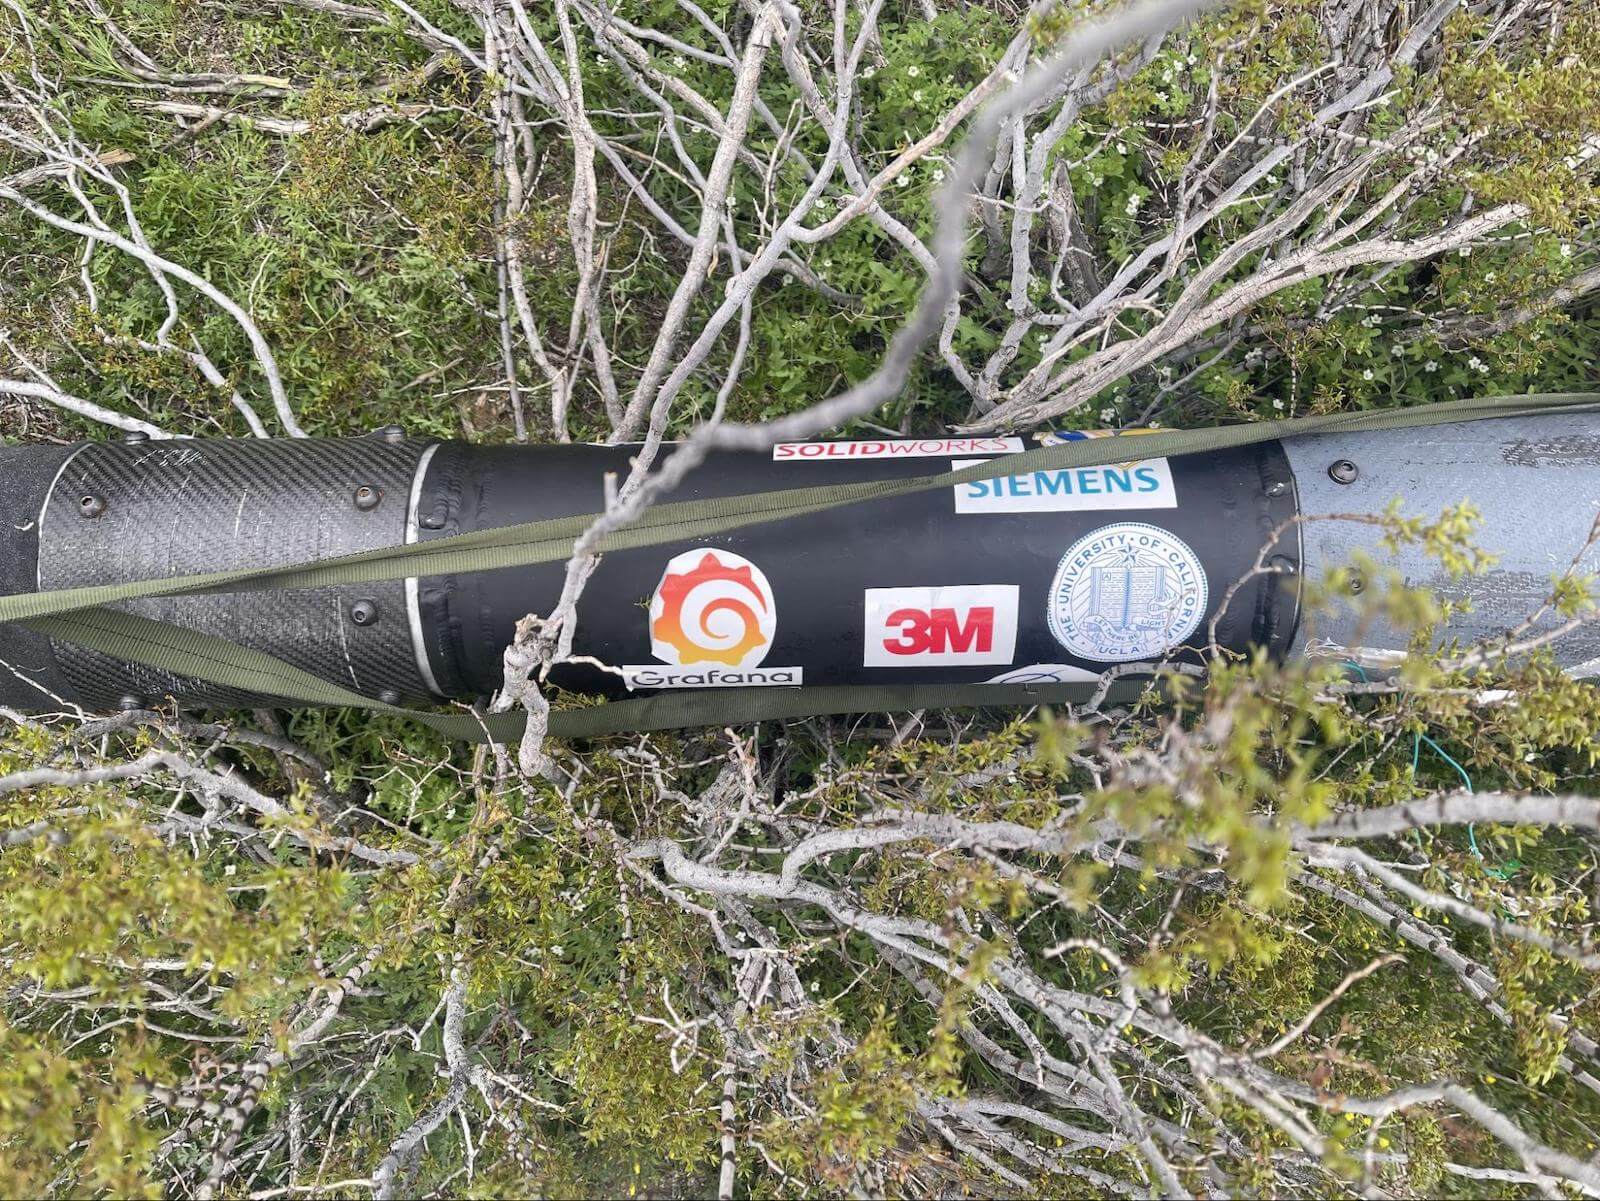 A photo of rocket in desert brush. The rocket is covered in stickers from Grafana, 3M, UCLA, Siemens, and Solidworks.